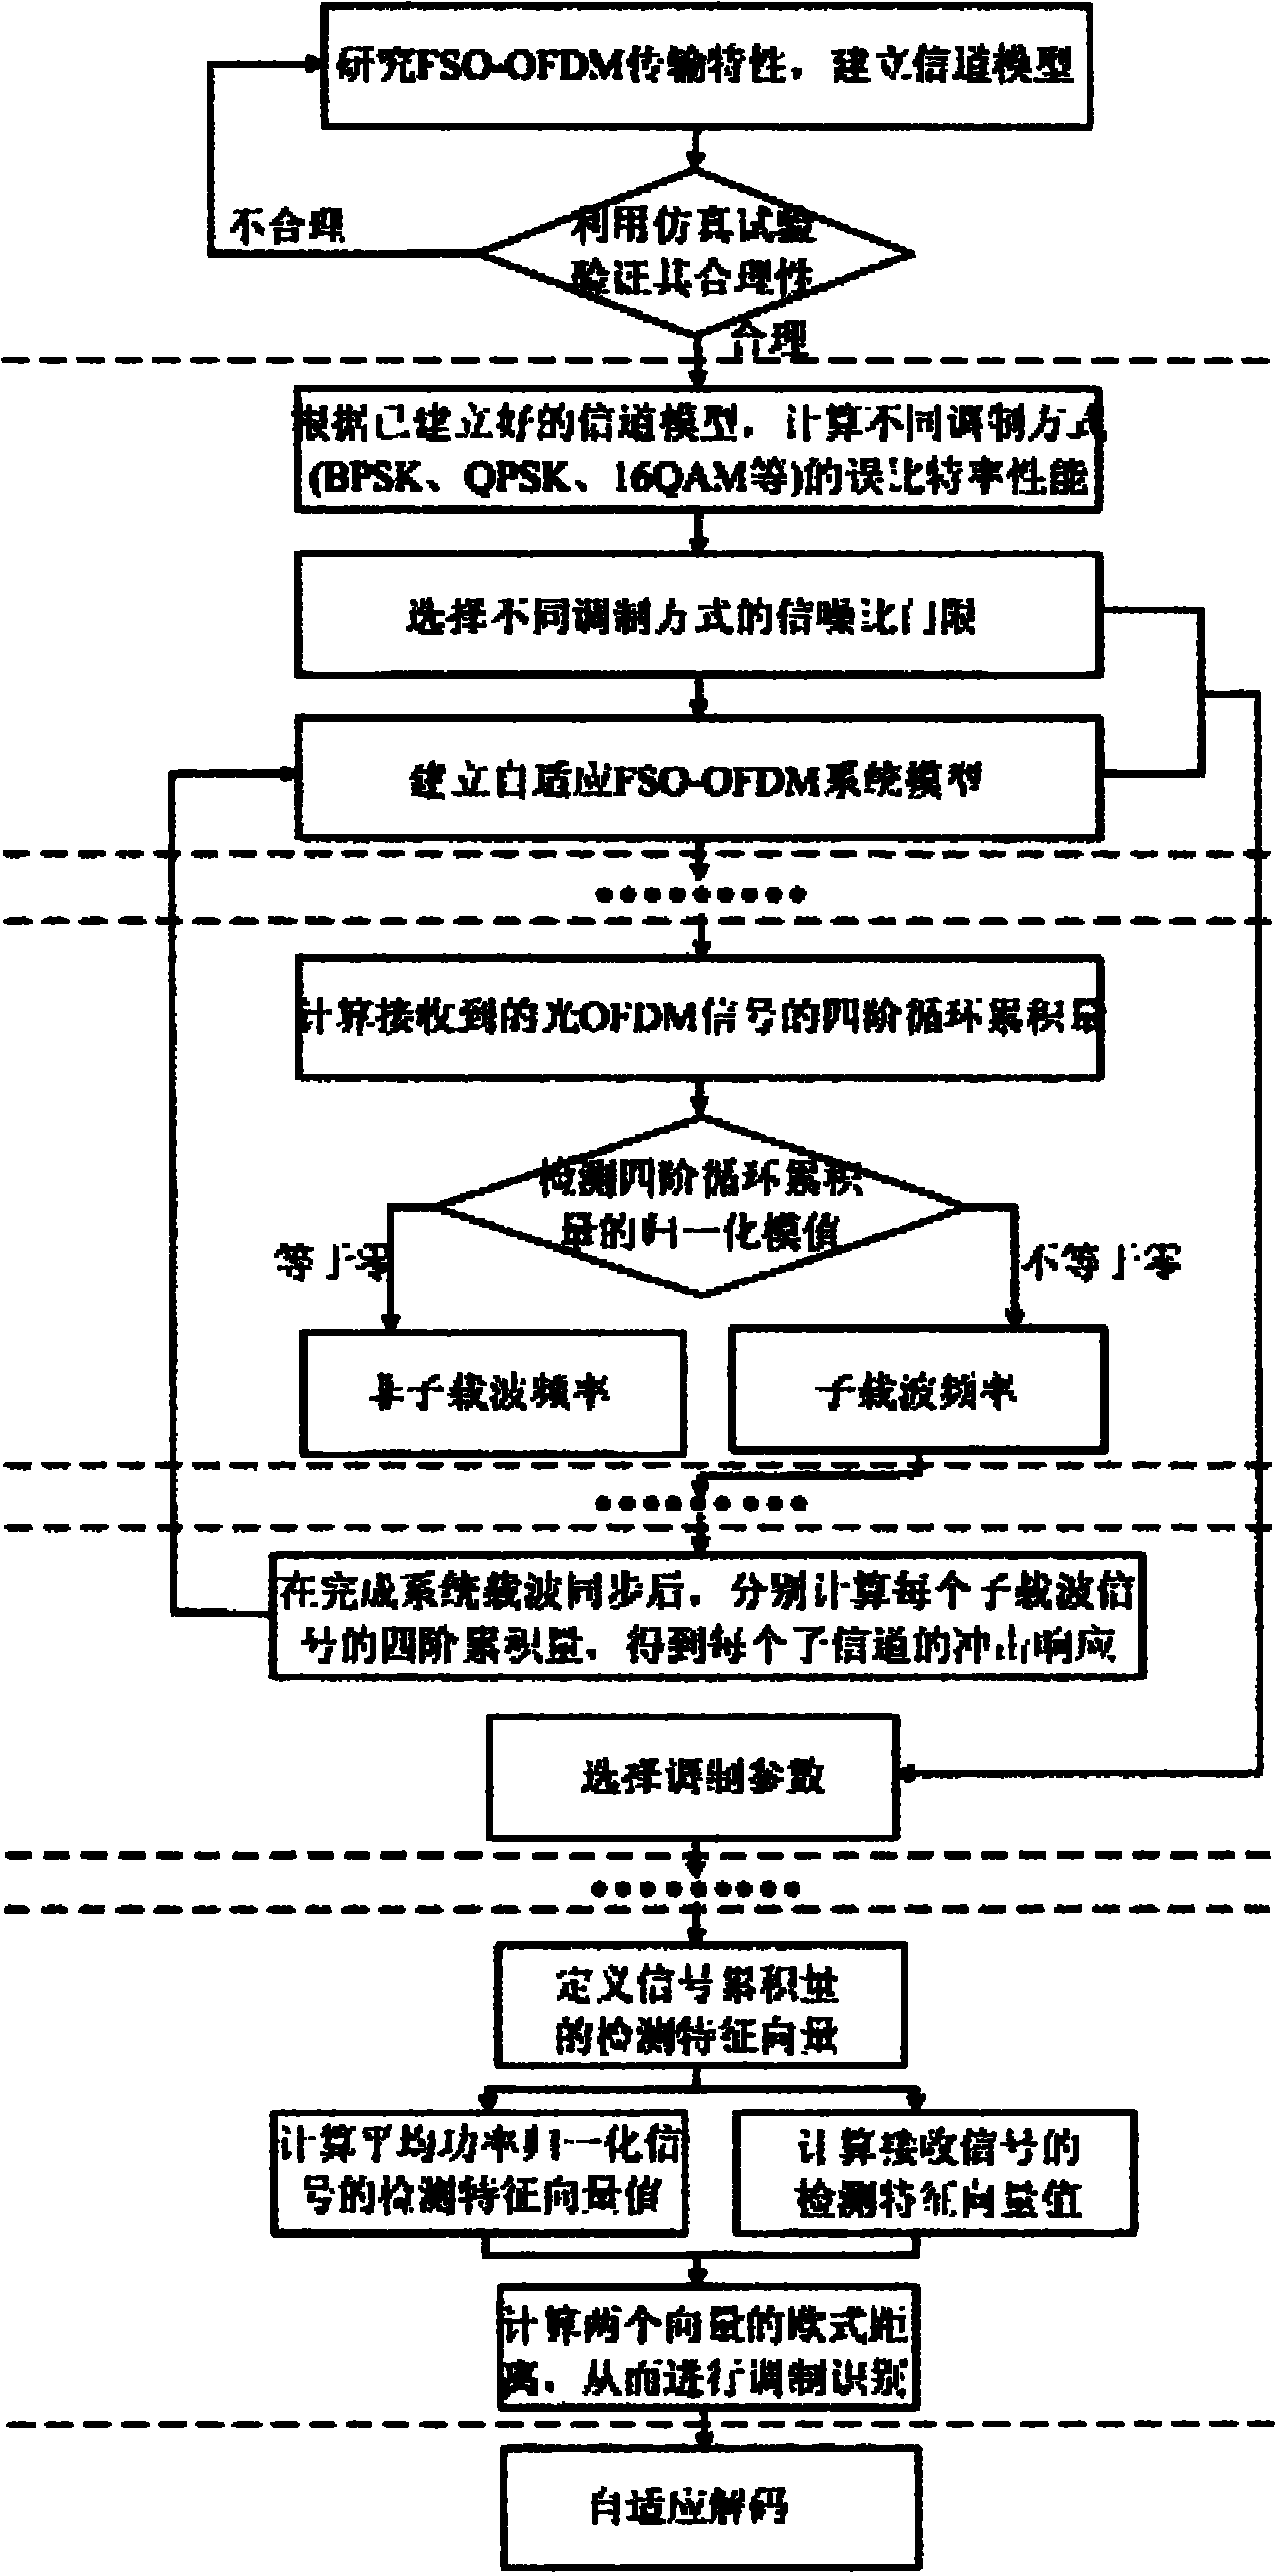 Adaptive free space optical communication (FSO)-orthogonal frequency division multiplexing (OFDM) transmission system and transmission method